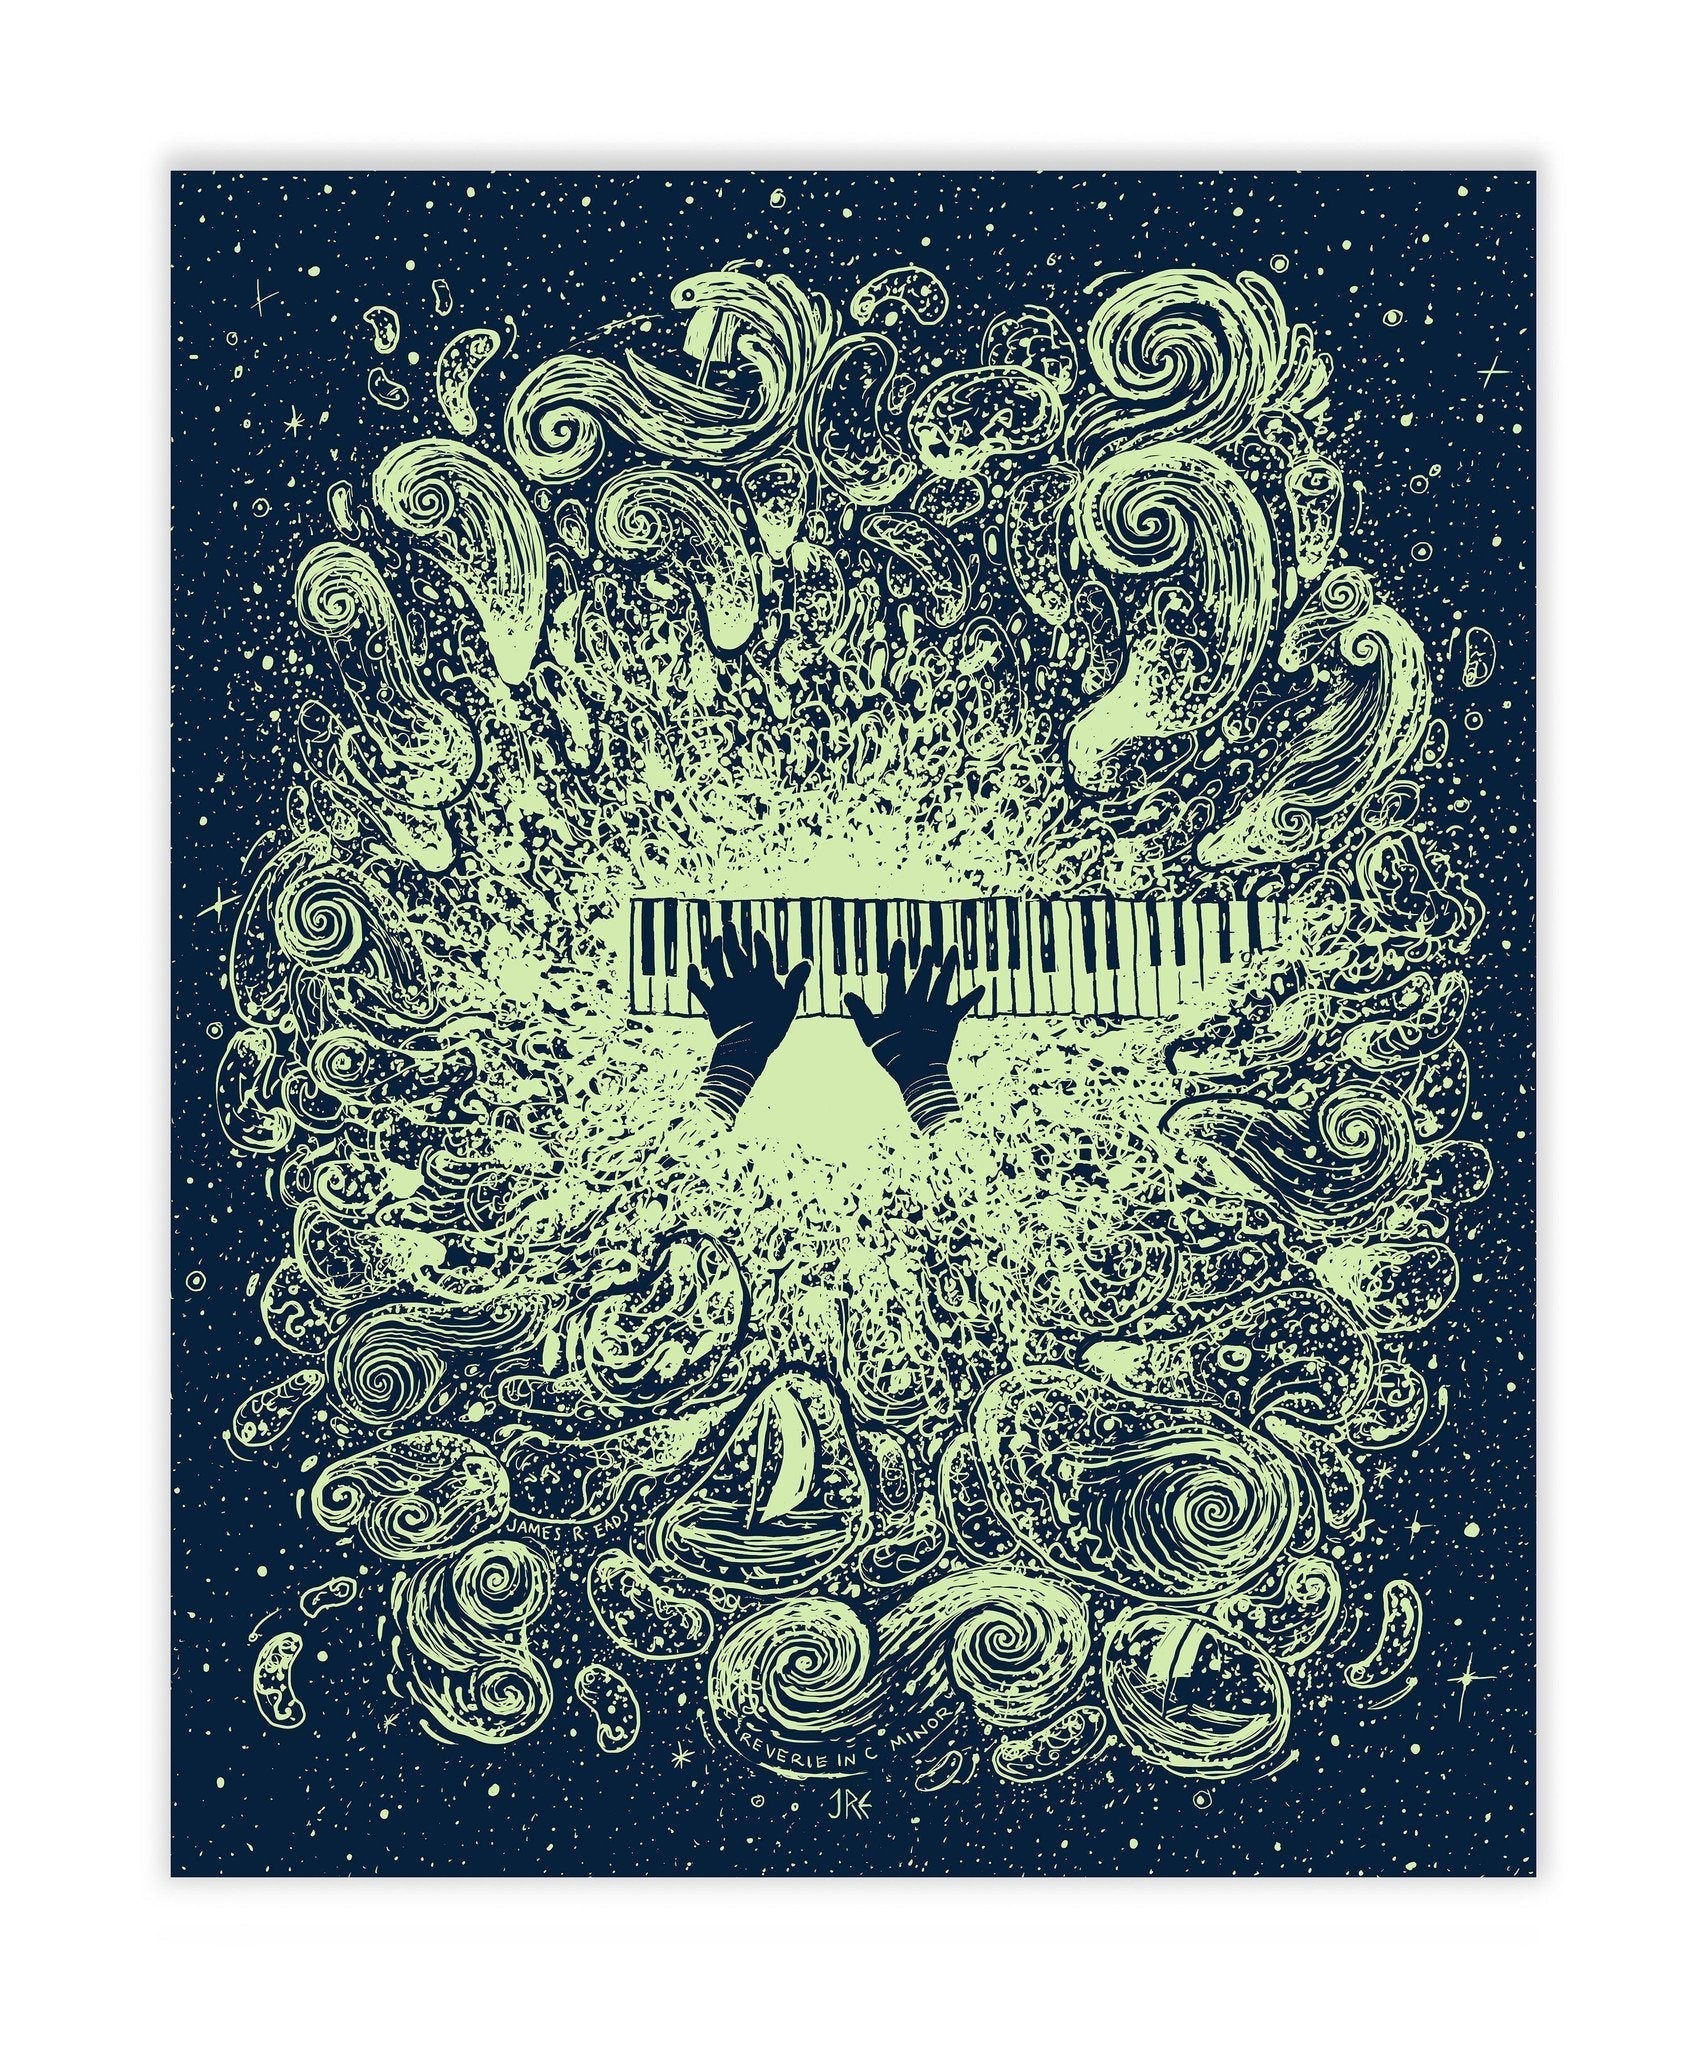 Reverie in C Minor (Cream Green Edition of 40) James R. Eads